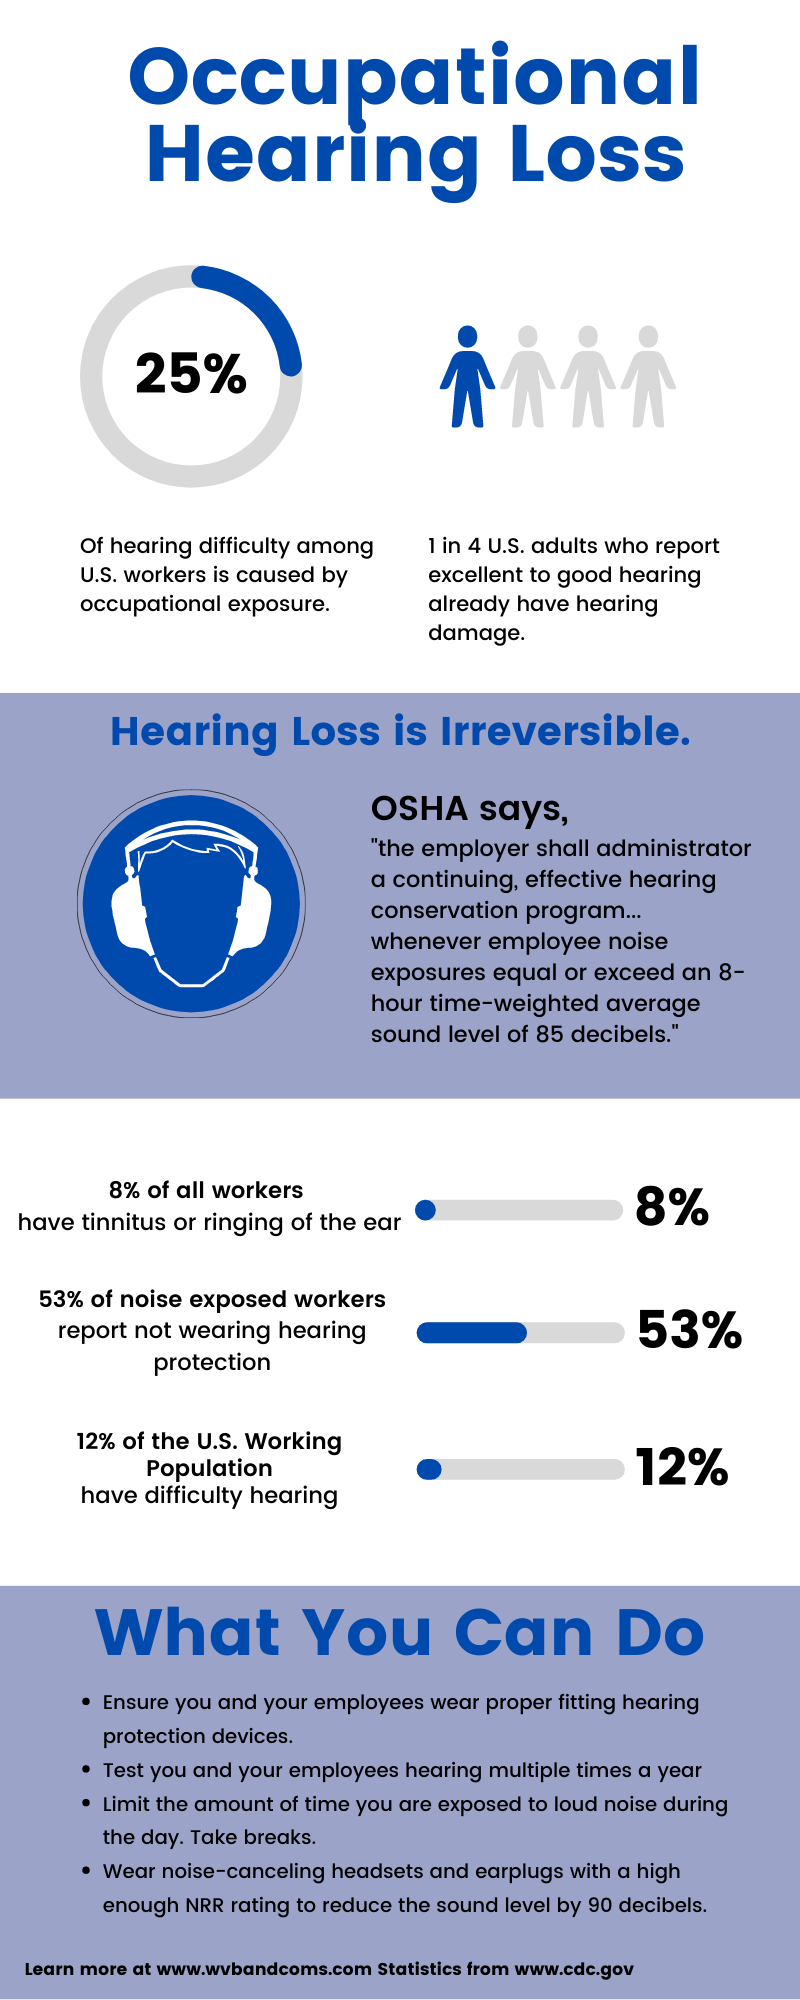 OSHA and Workplace Hearing Conservation